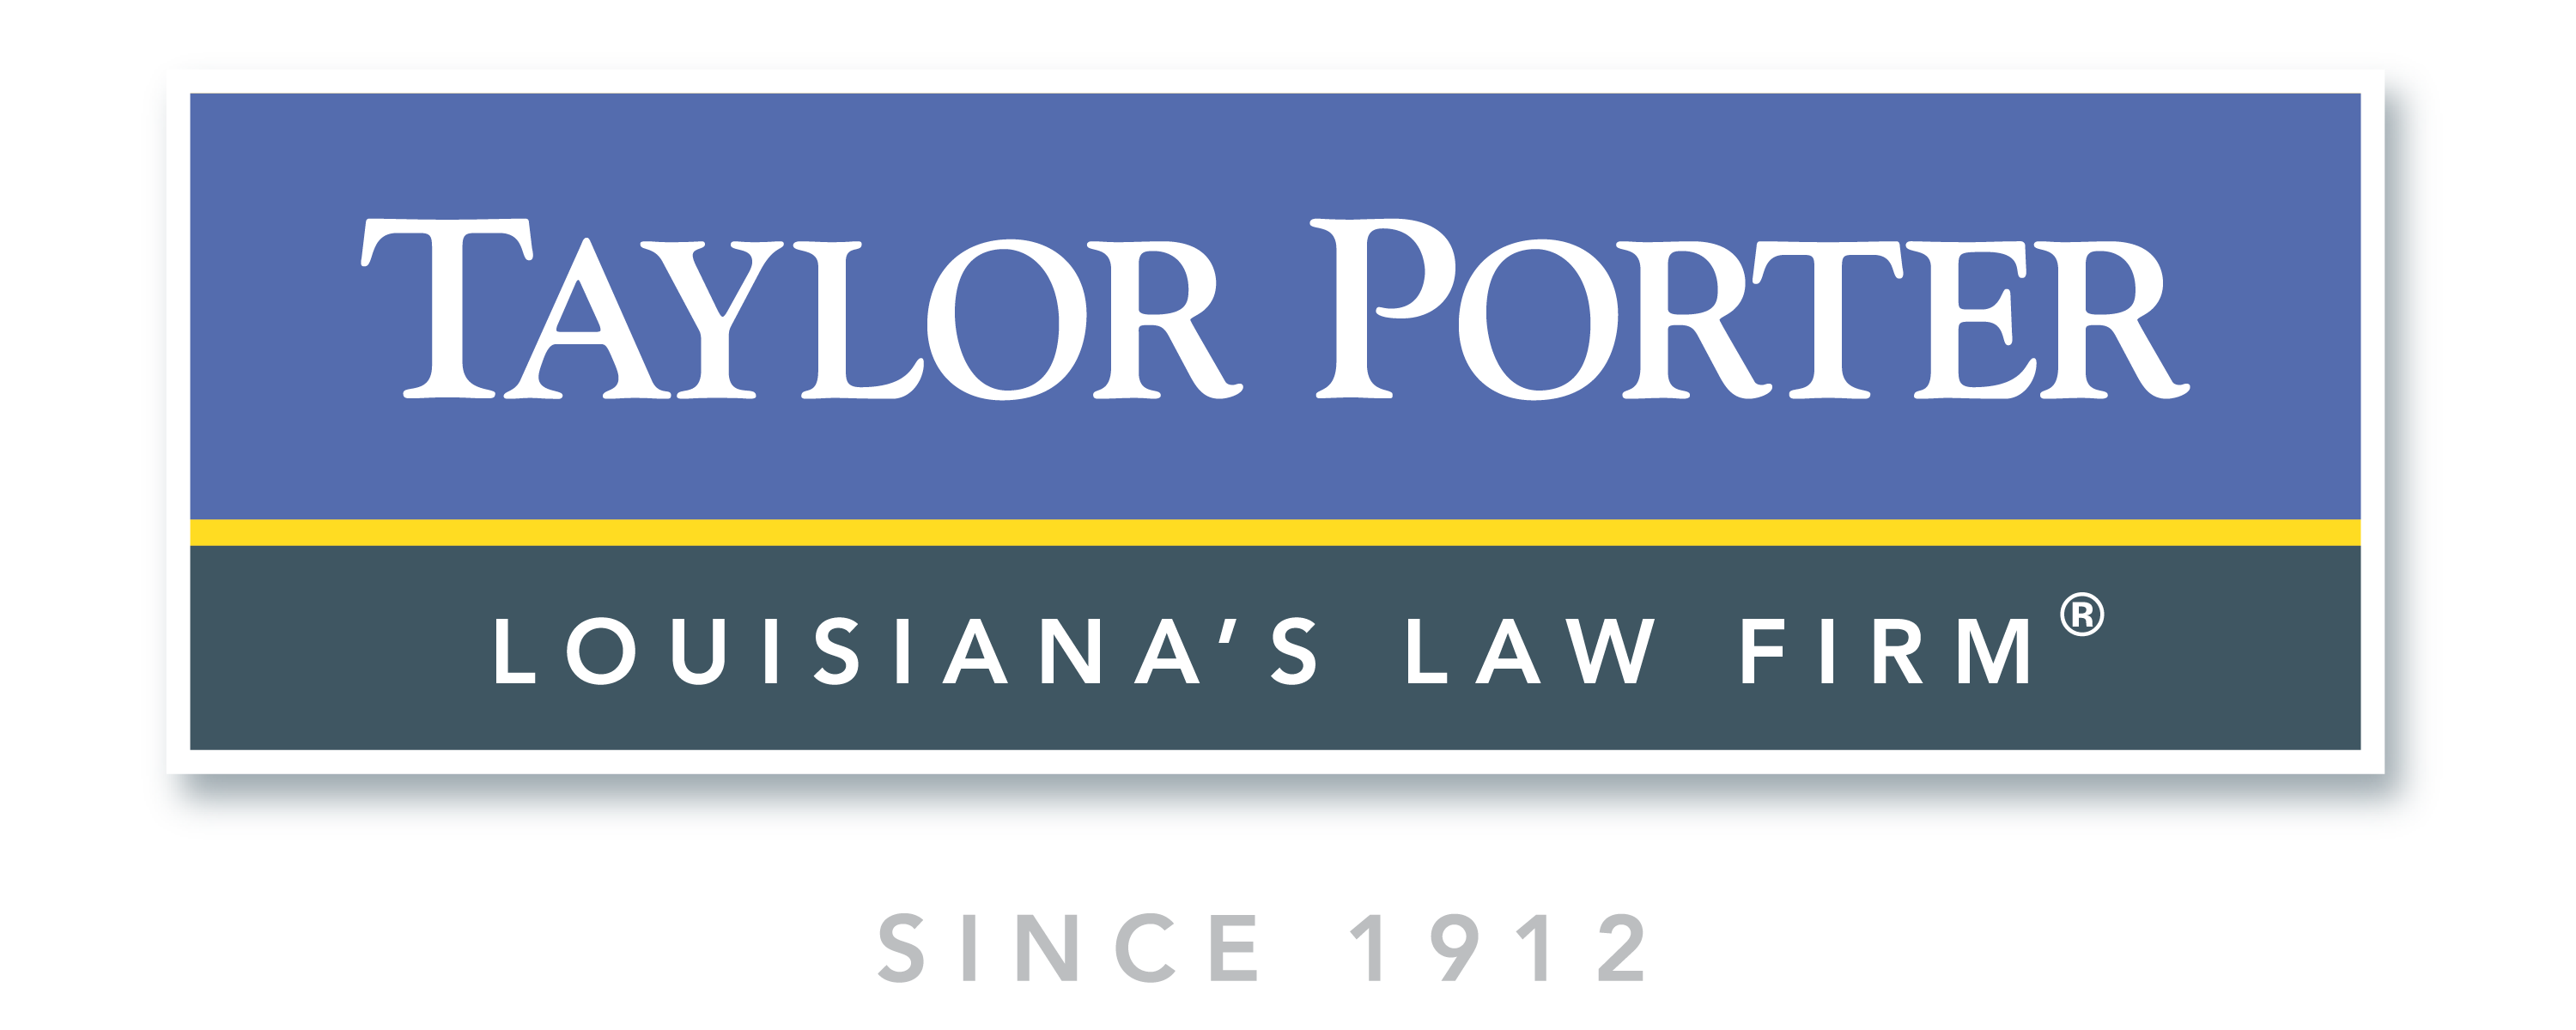 logo for taylor porter law firm